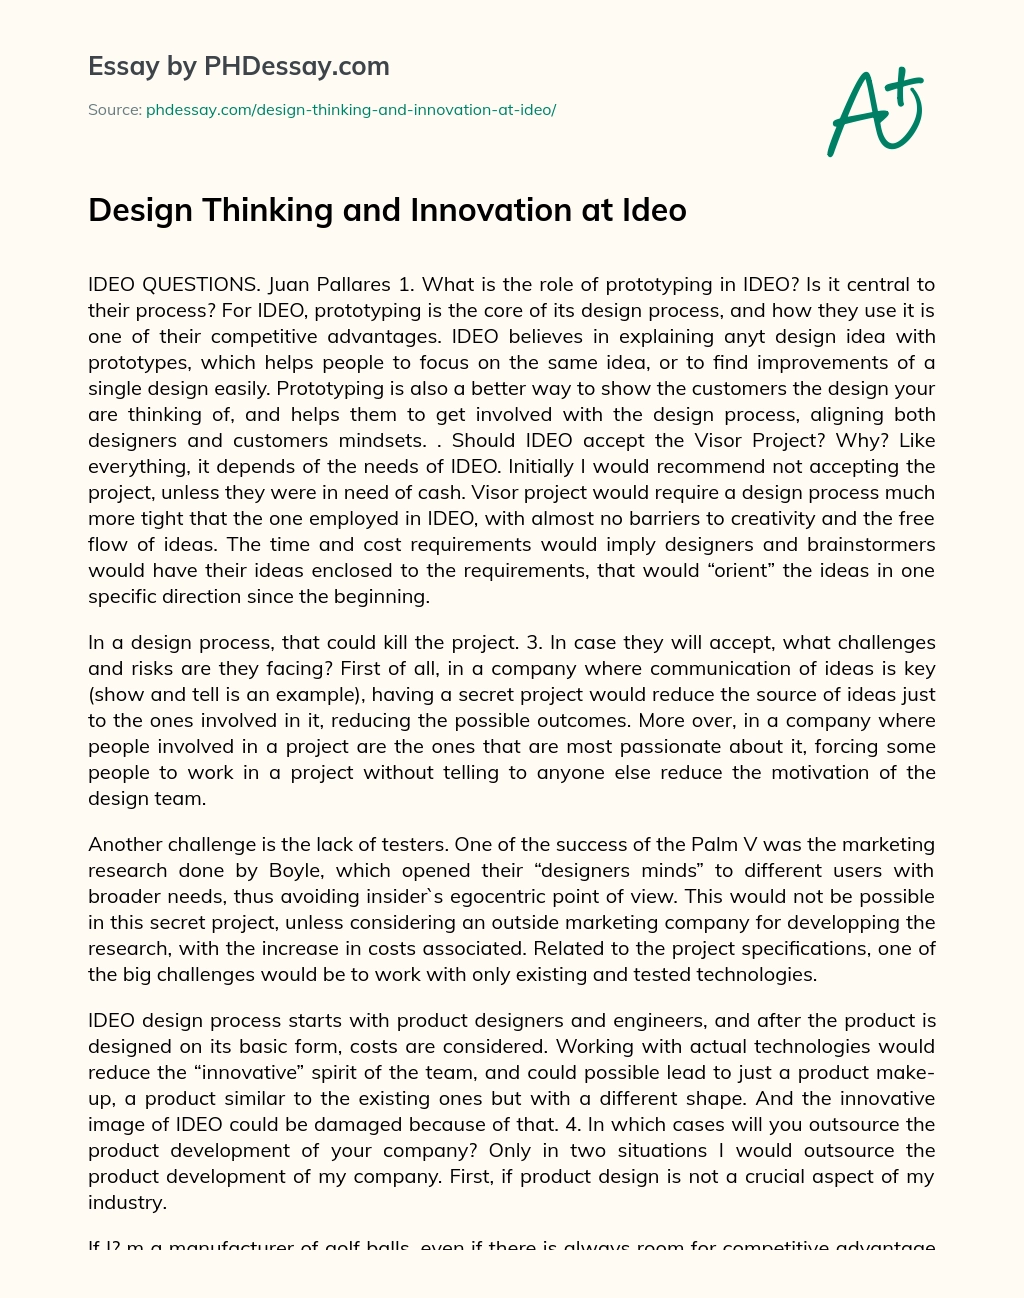 Design Thinking and Innovation at Ideo essay